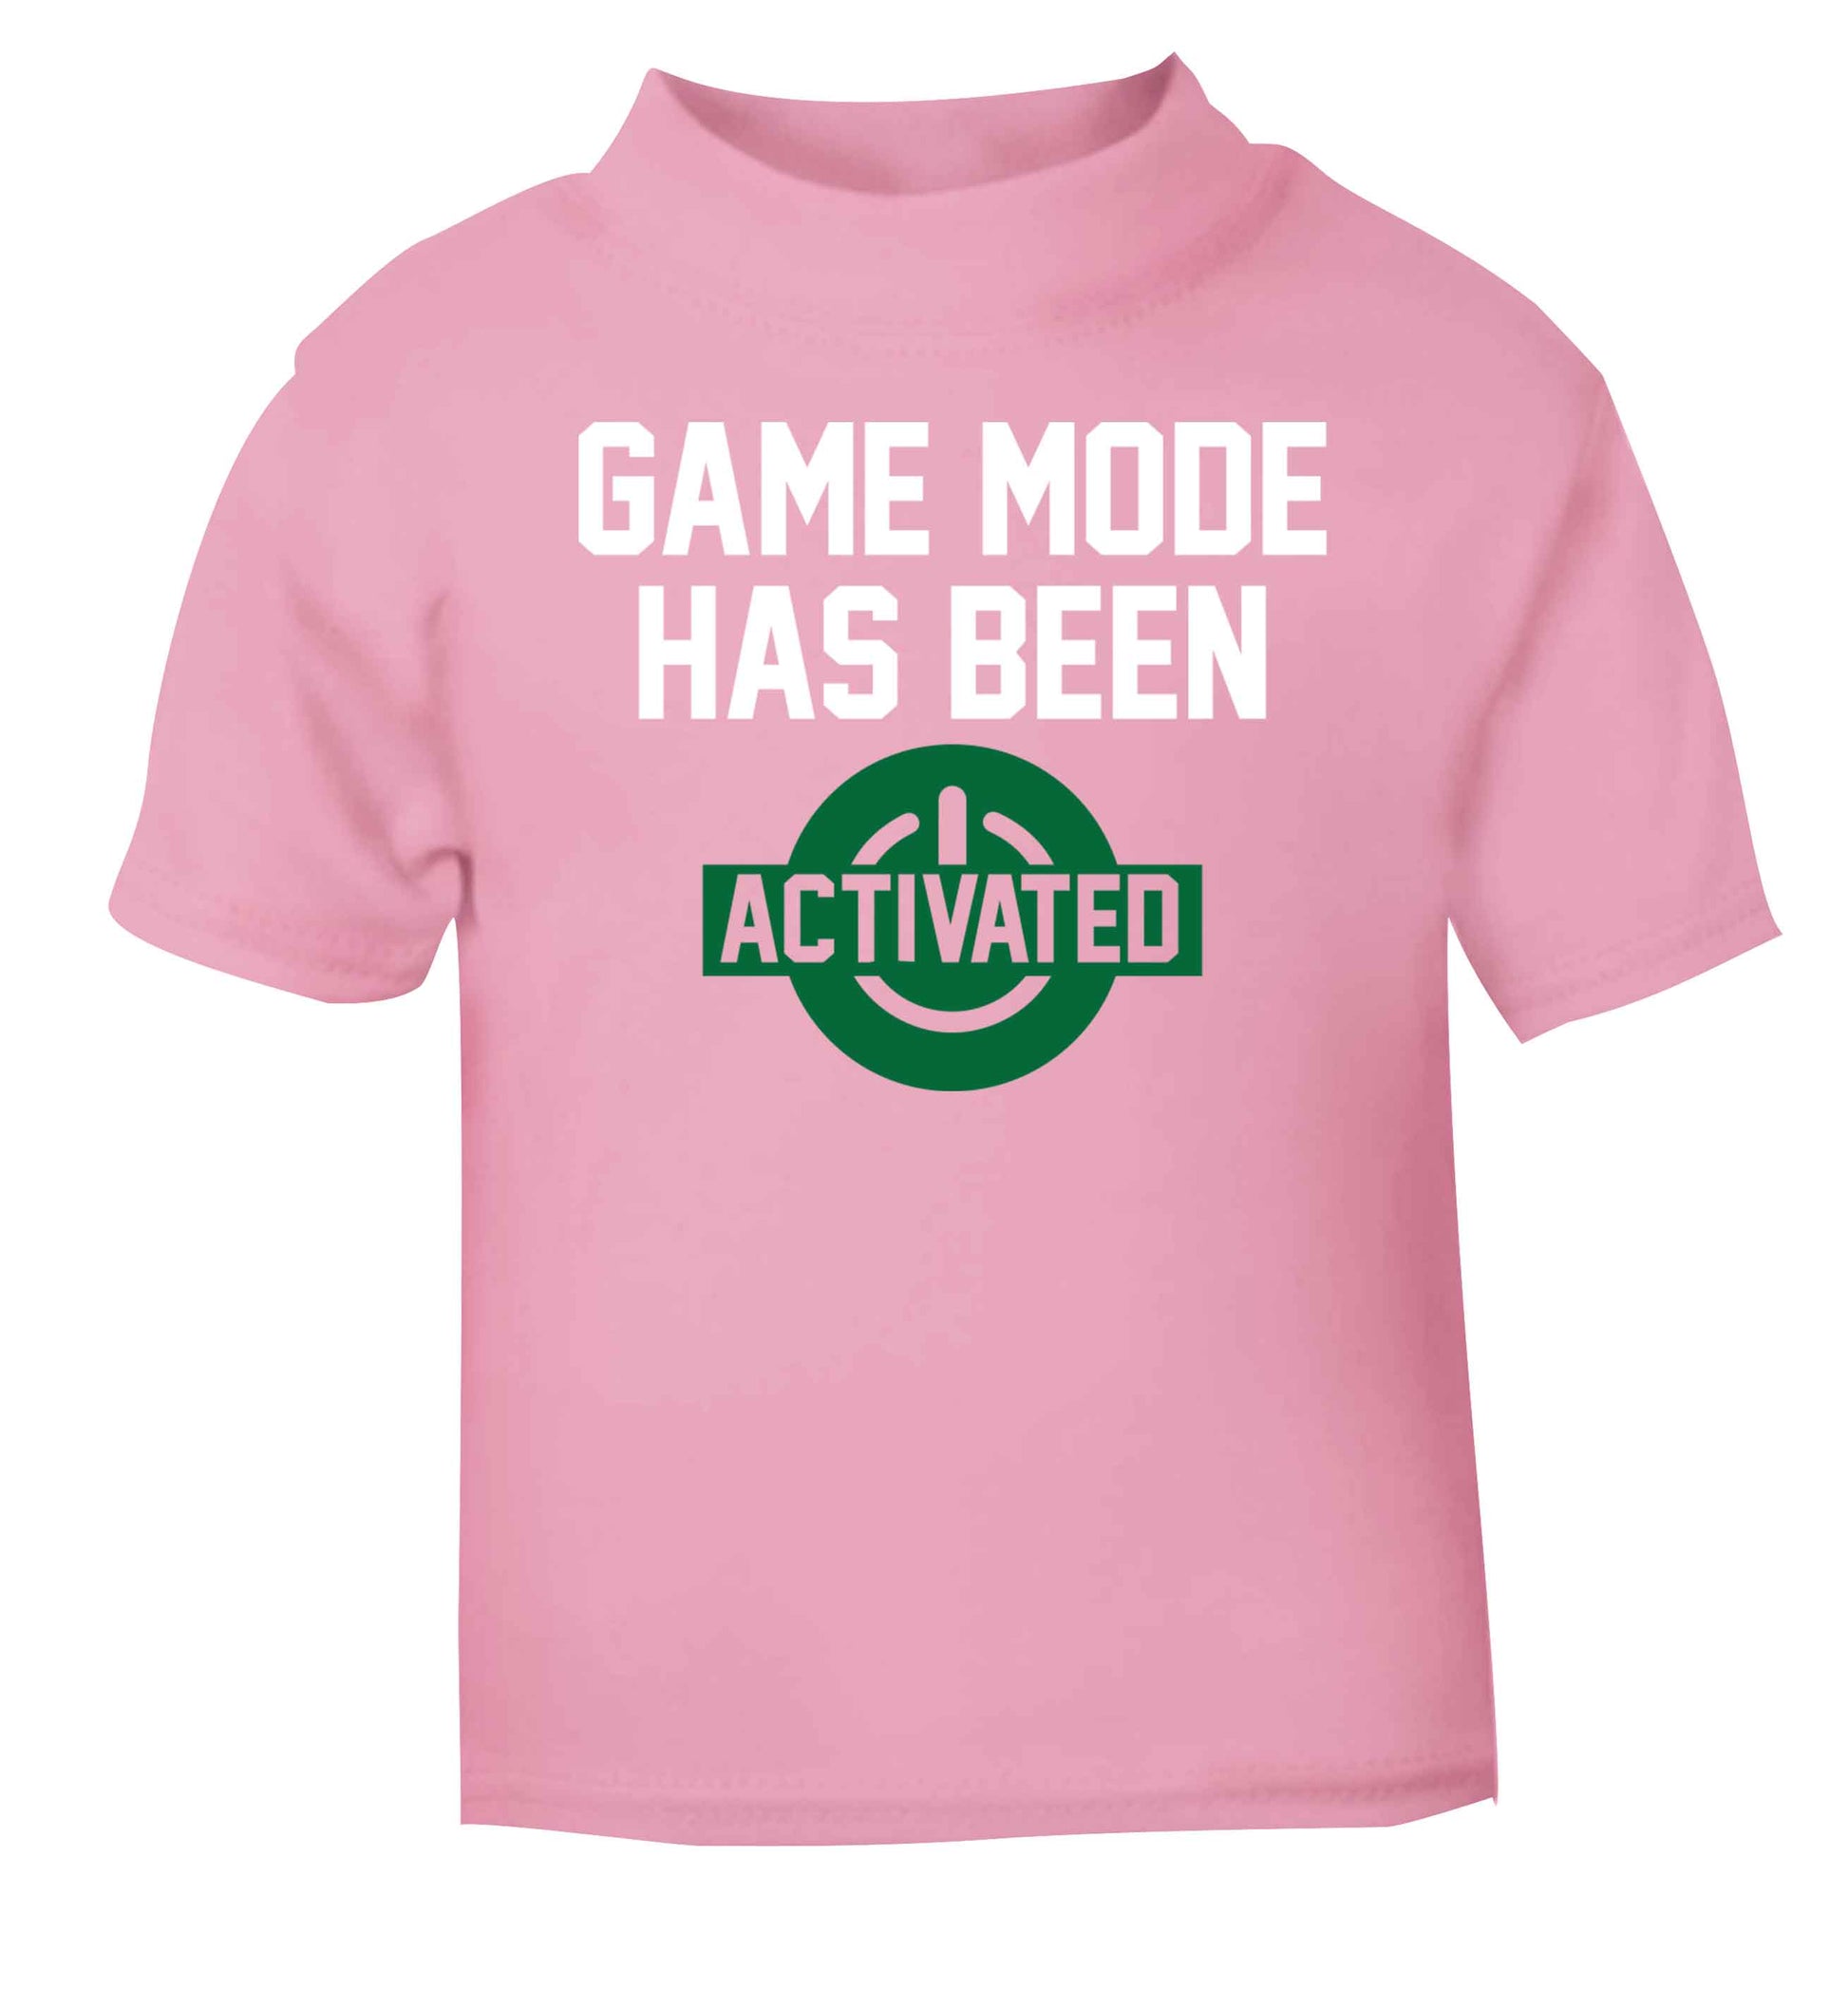 Game mode has been activated light pink baby toddler Tshirt 2 Years